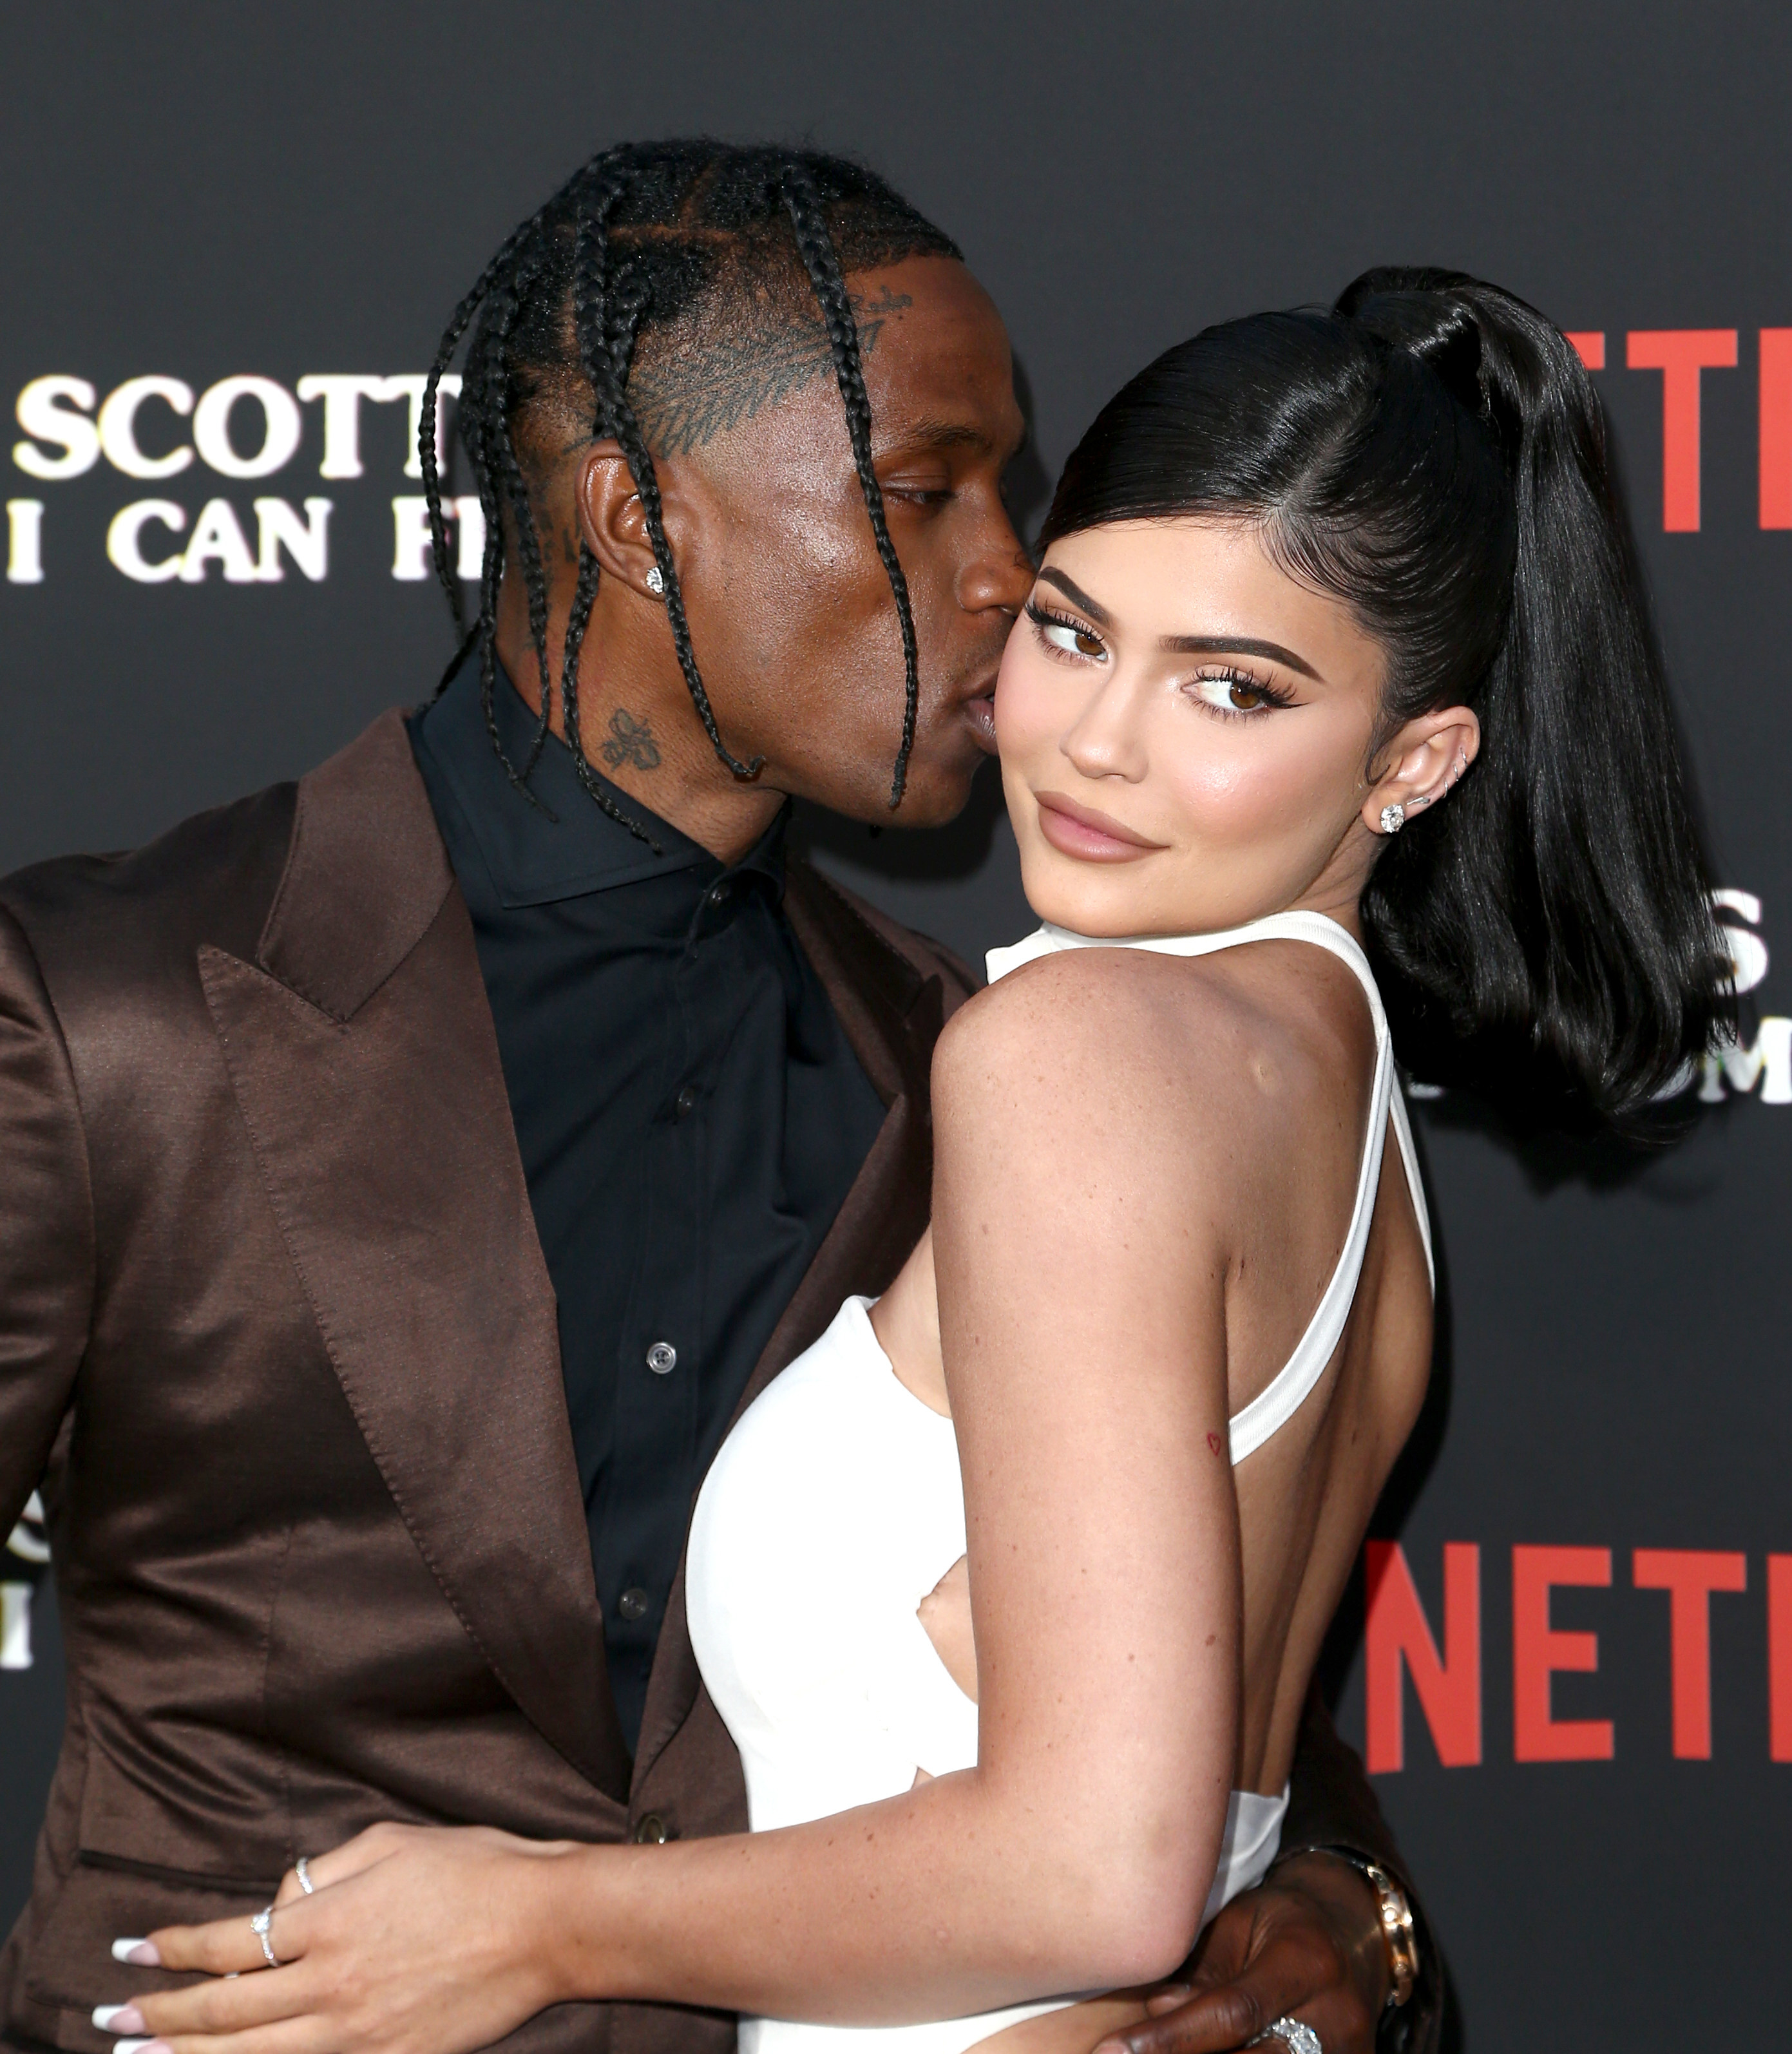 Travis kissing Kylie on the red carpet